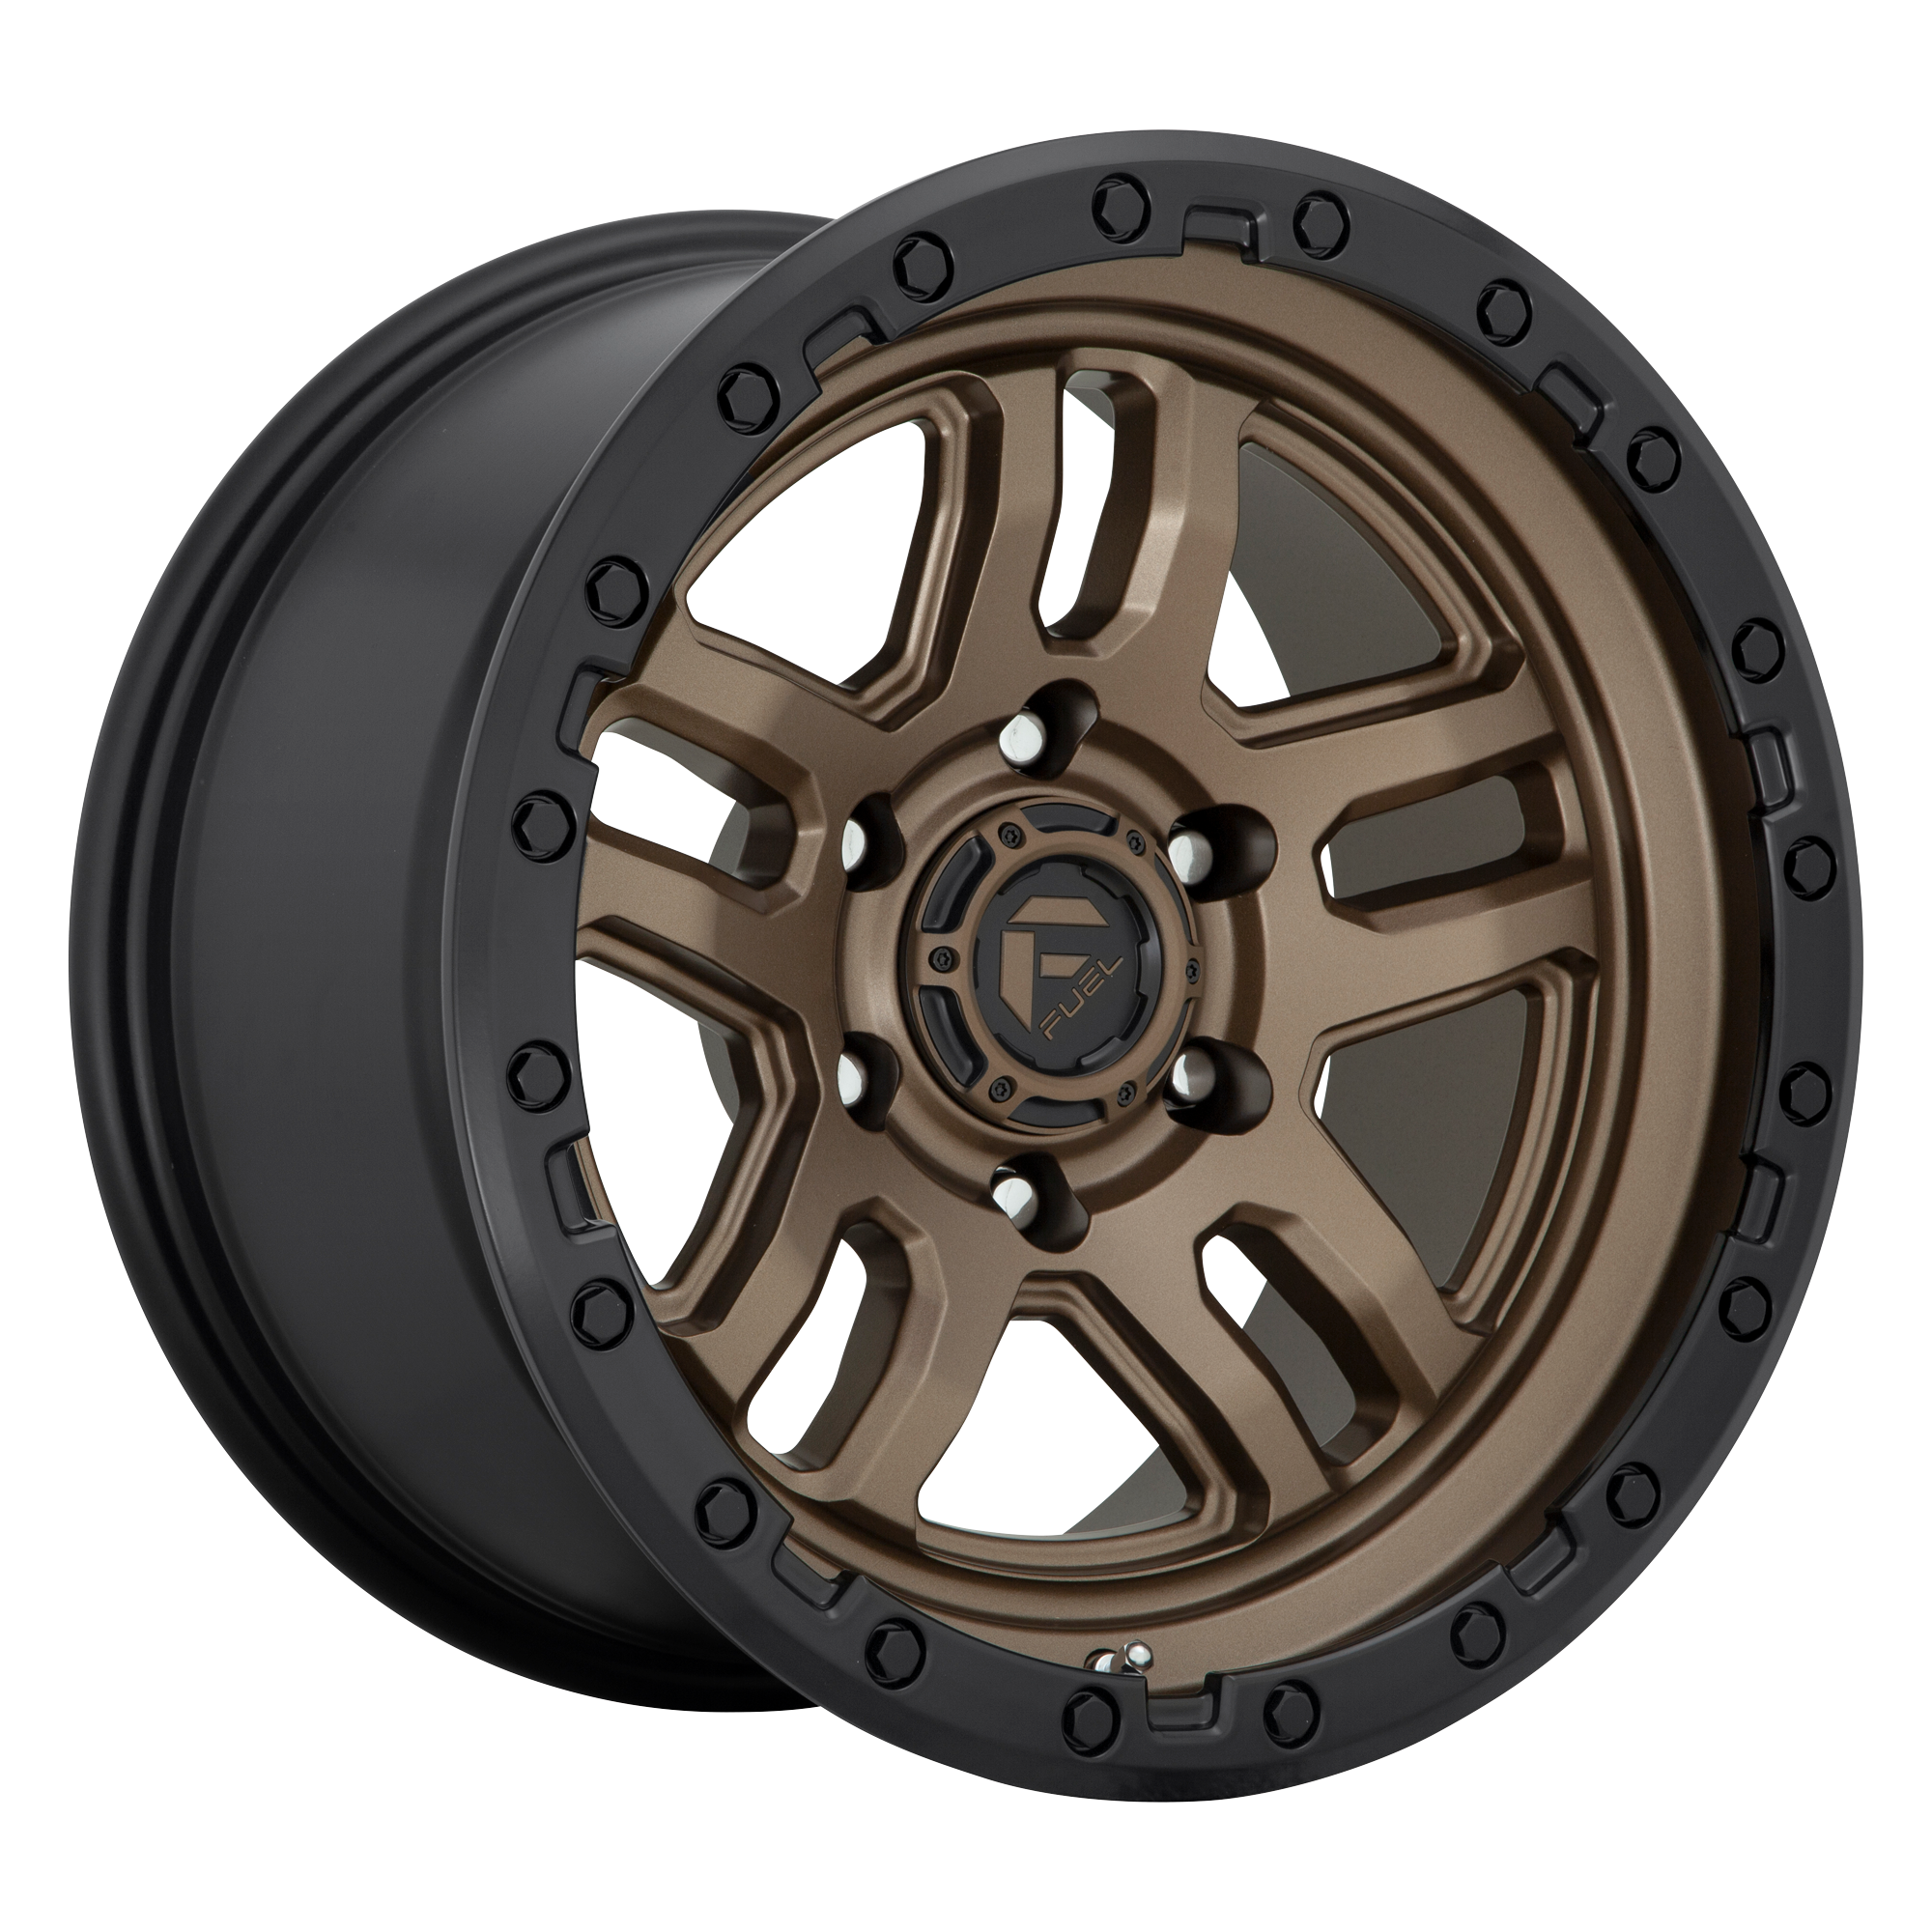 AMMO 17x9 5x127.00 MATTE BRONZE BLACK BEAD RING (-12 mm) - Tires and Engine Performance